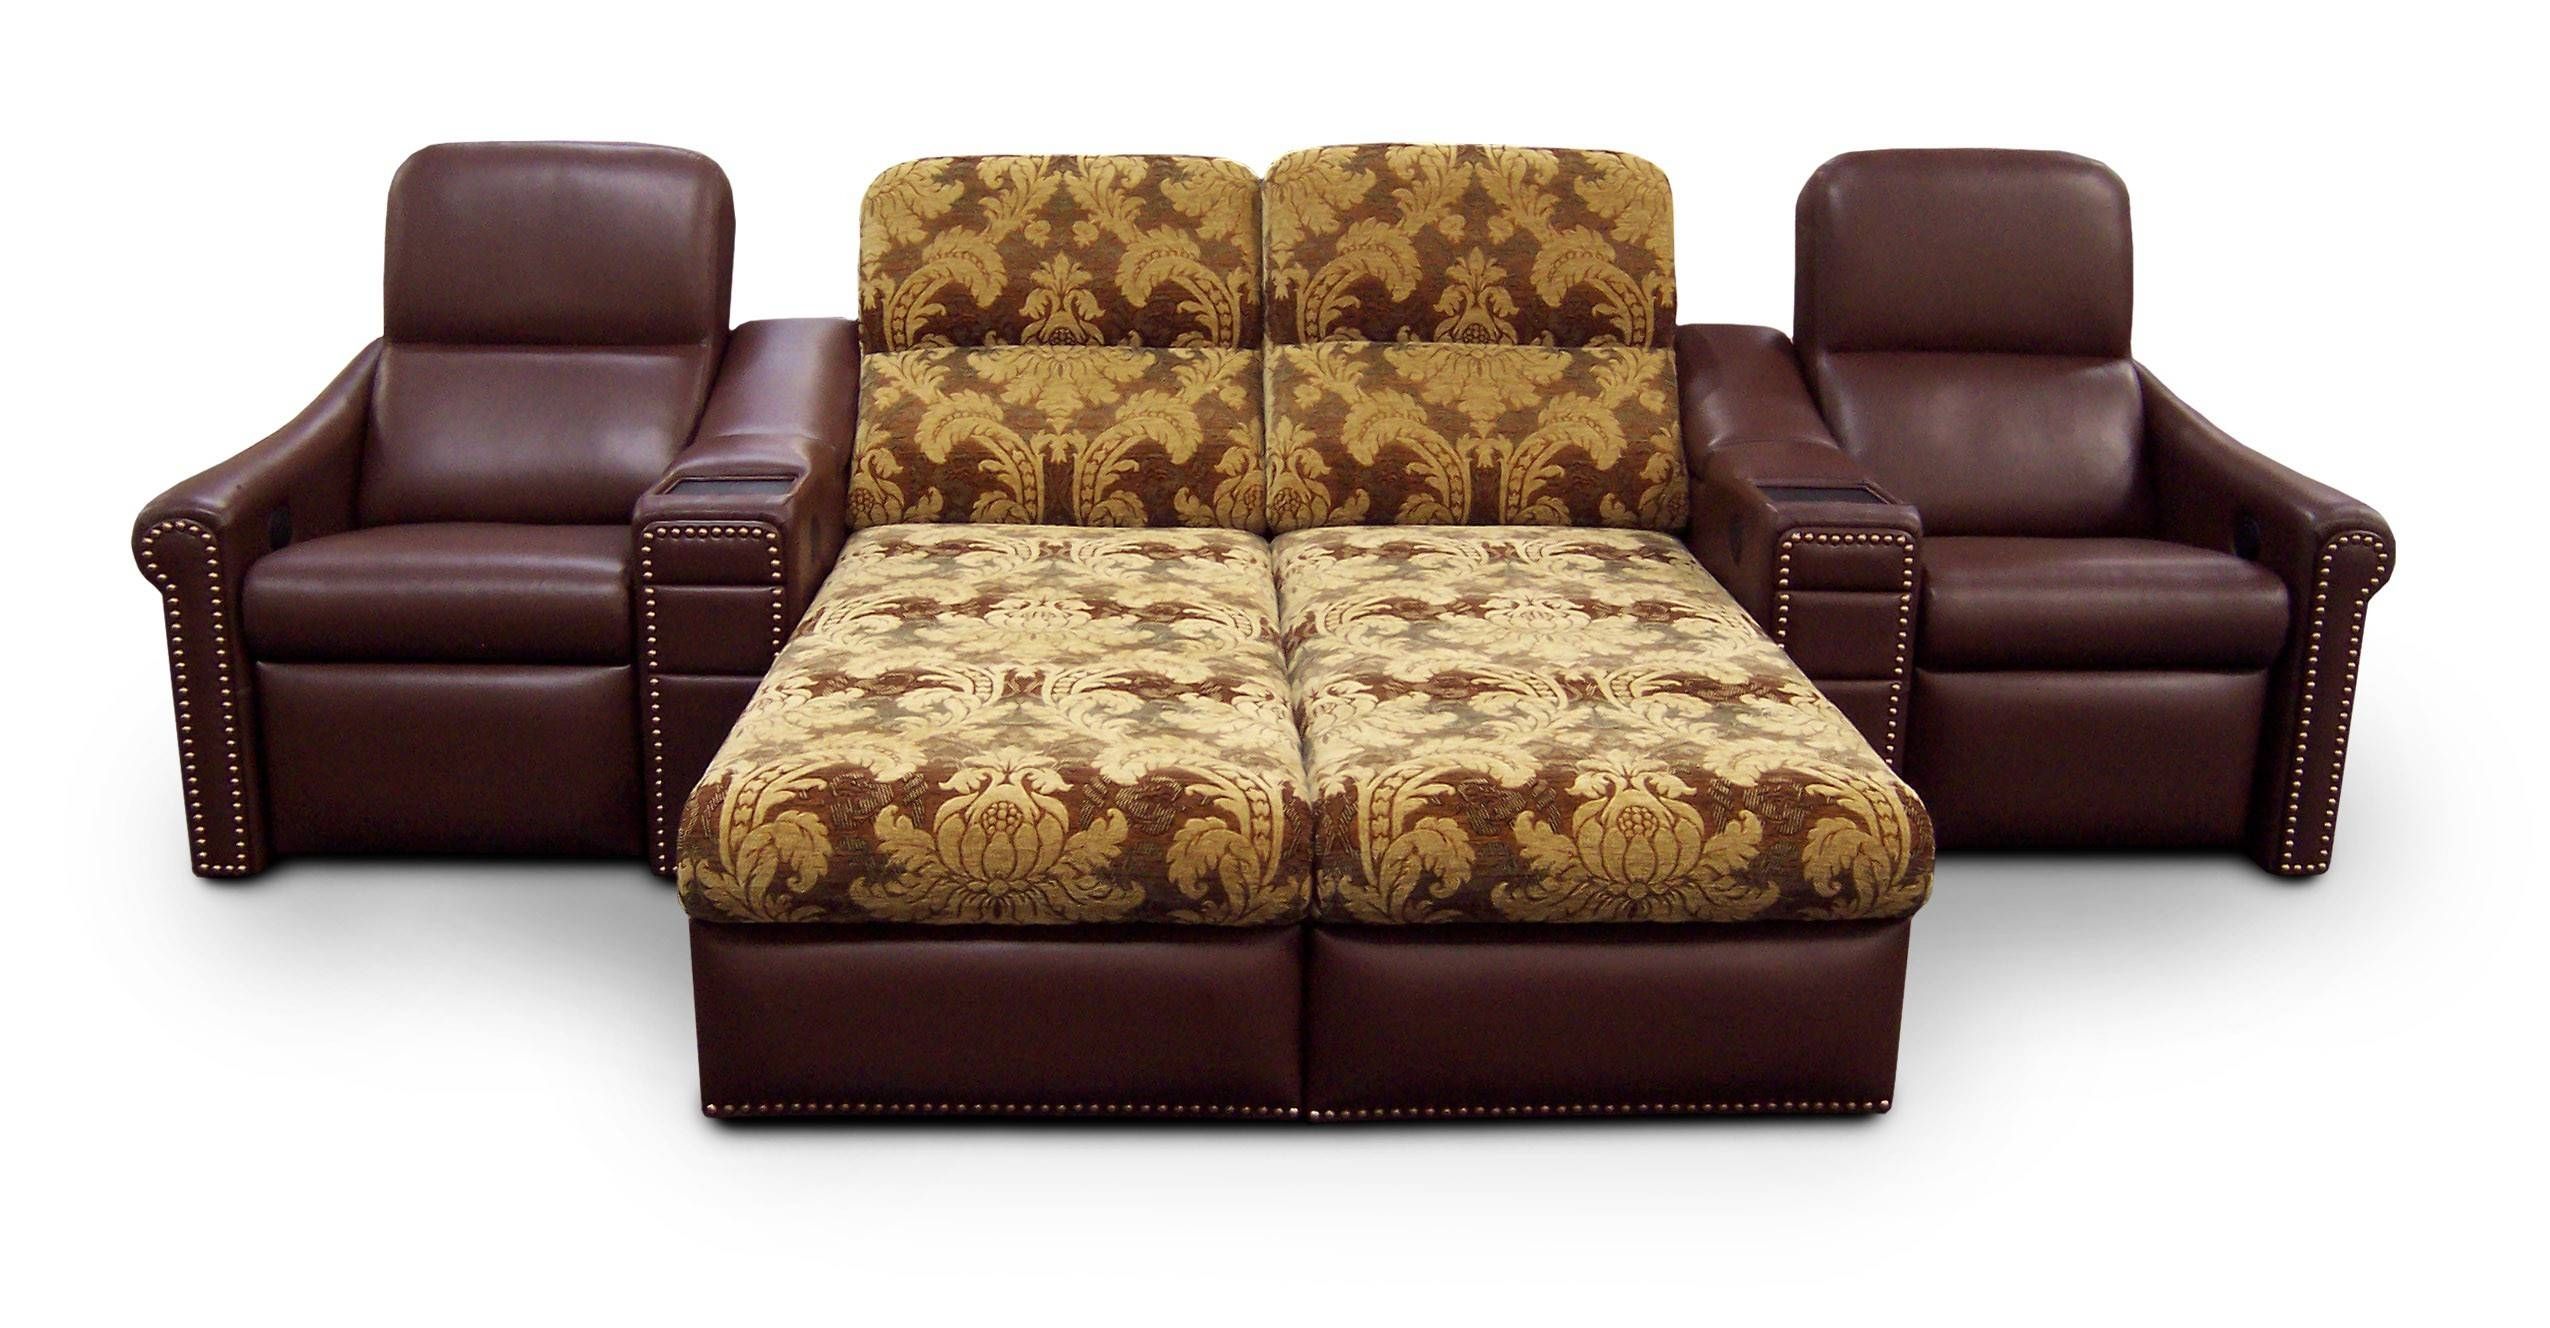 Sofas Center : Double Chaise Lounge Sectional Sofa Chair Intended For Chaise Sofa Chairs (Photo 9 of 15)